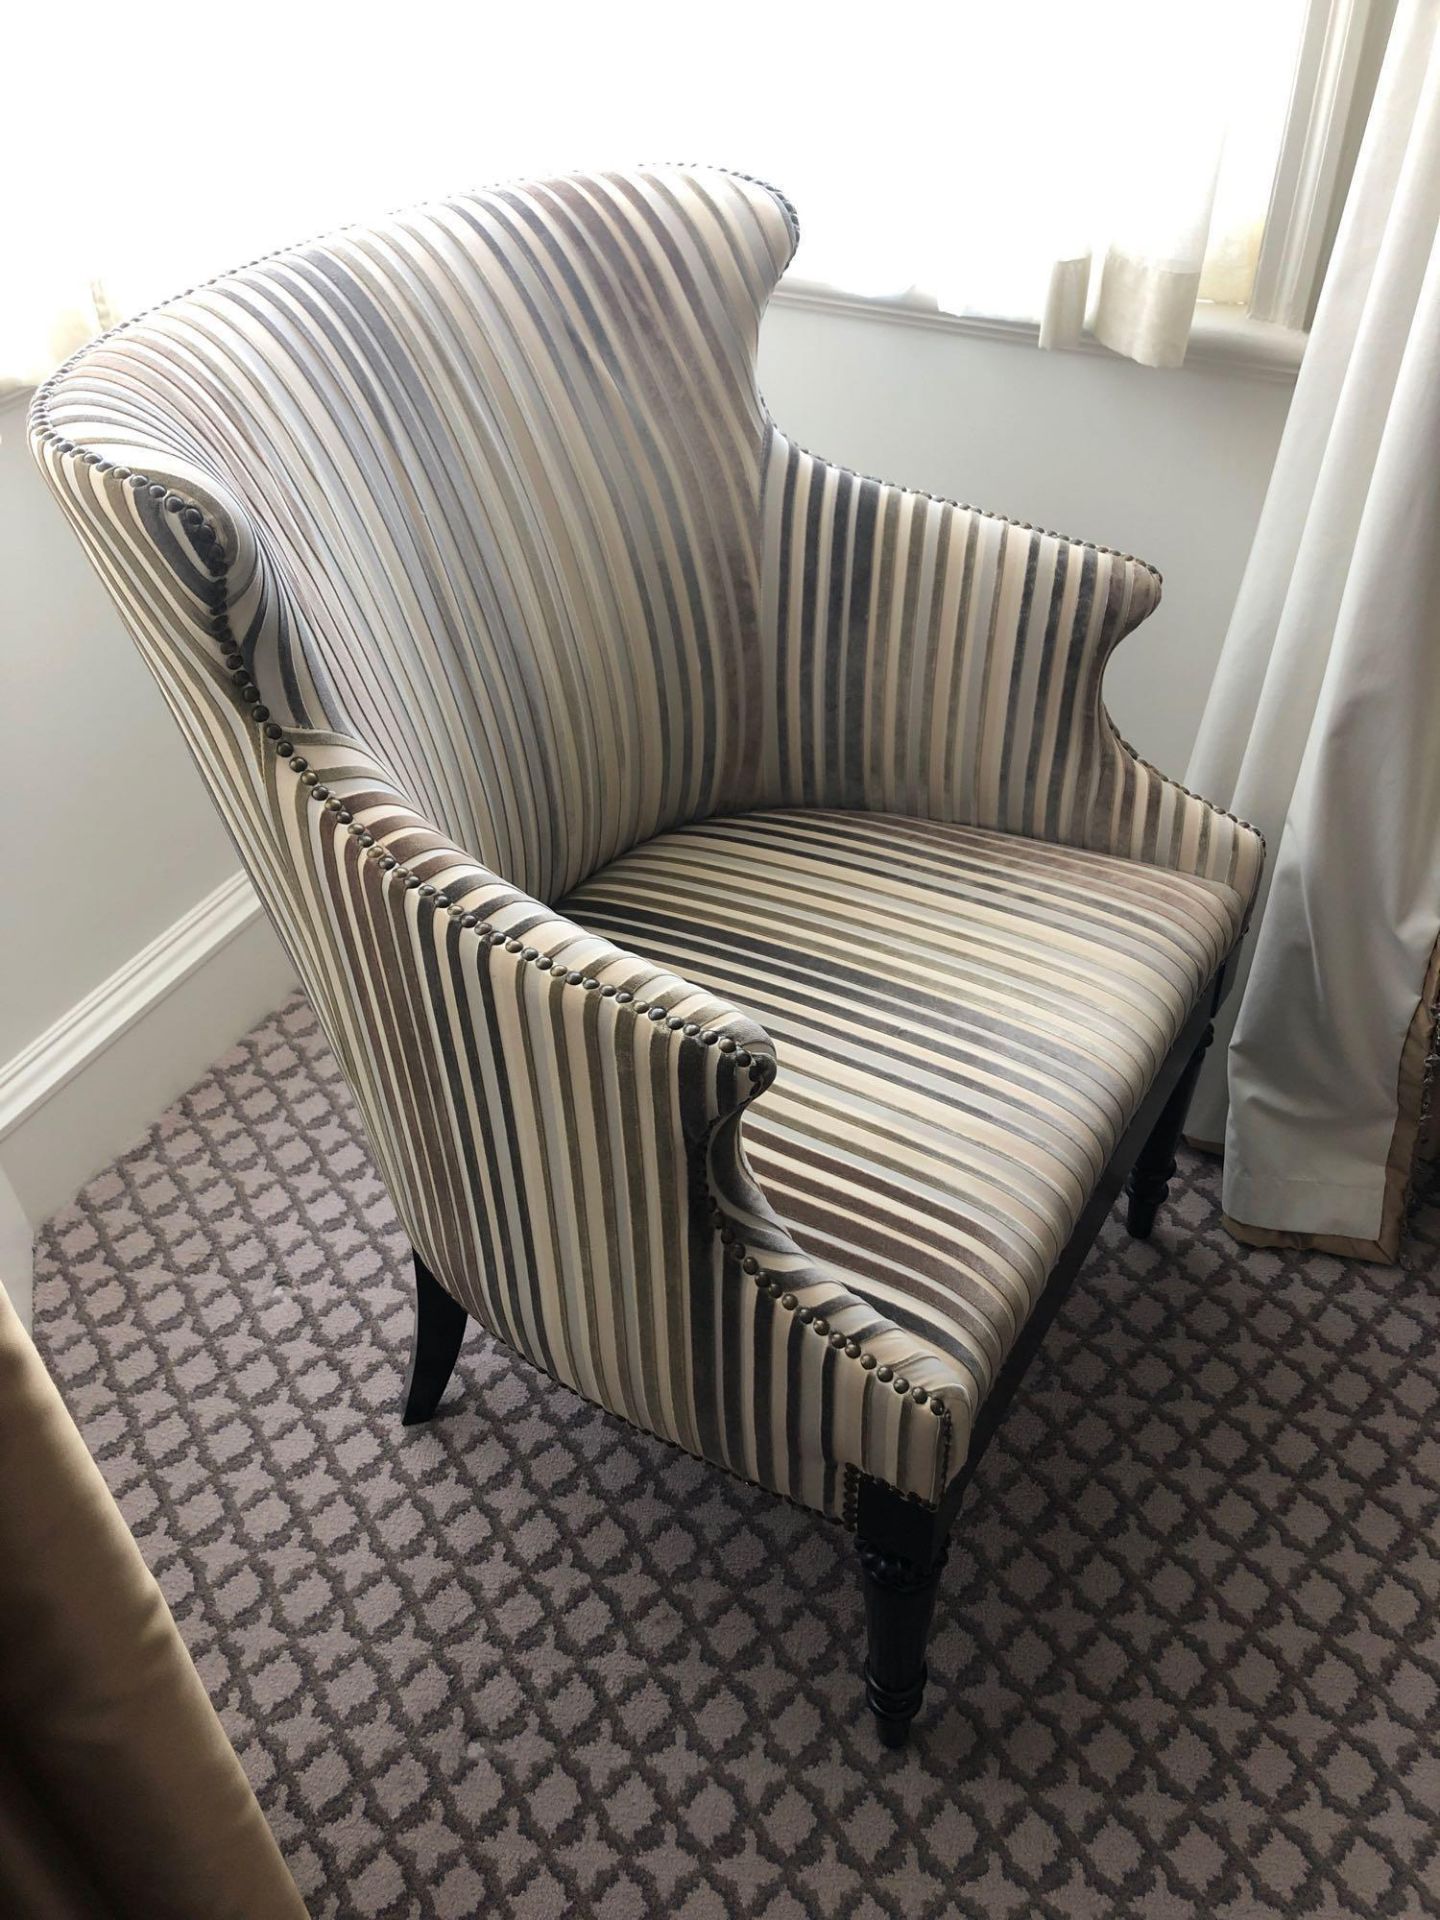 Accent Chair In Upholstered Striped Fabric 65 x 49 x 84cm (Room 501/502) - Image 2 of 3